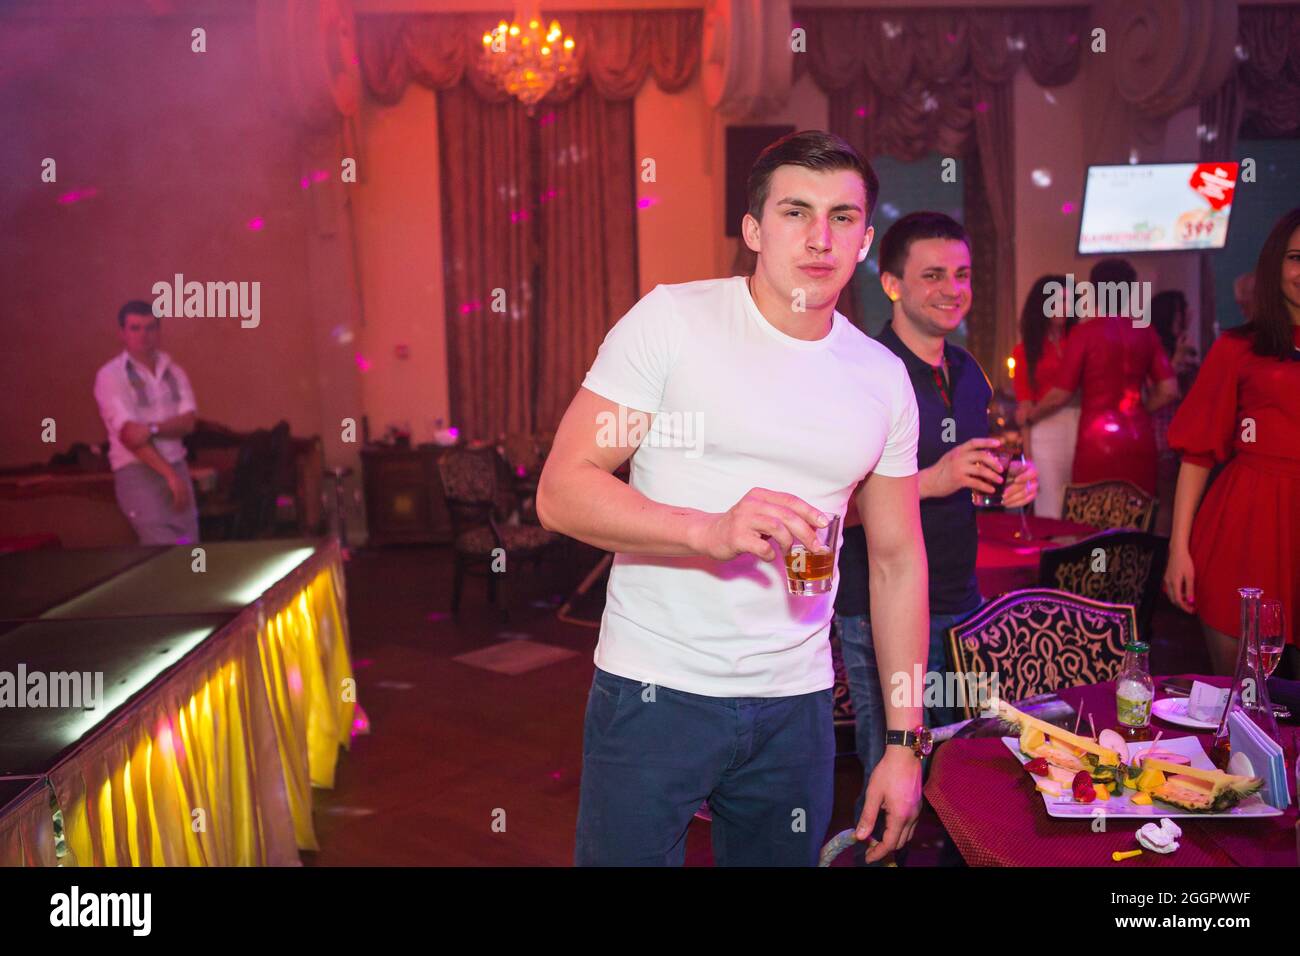 Odessa, Ukraine April 26, 2014: Ministerium night club. People smiling and posing on cam during concert in night club party. Man and woman have fun at Stock Photo